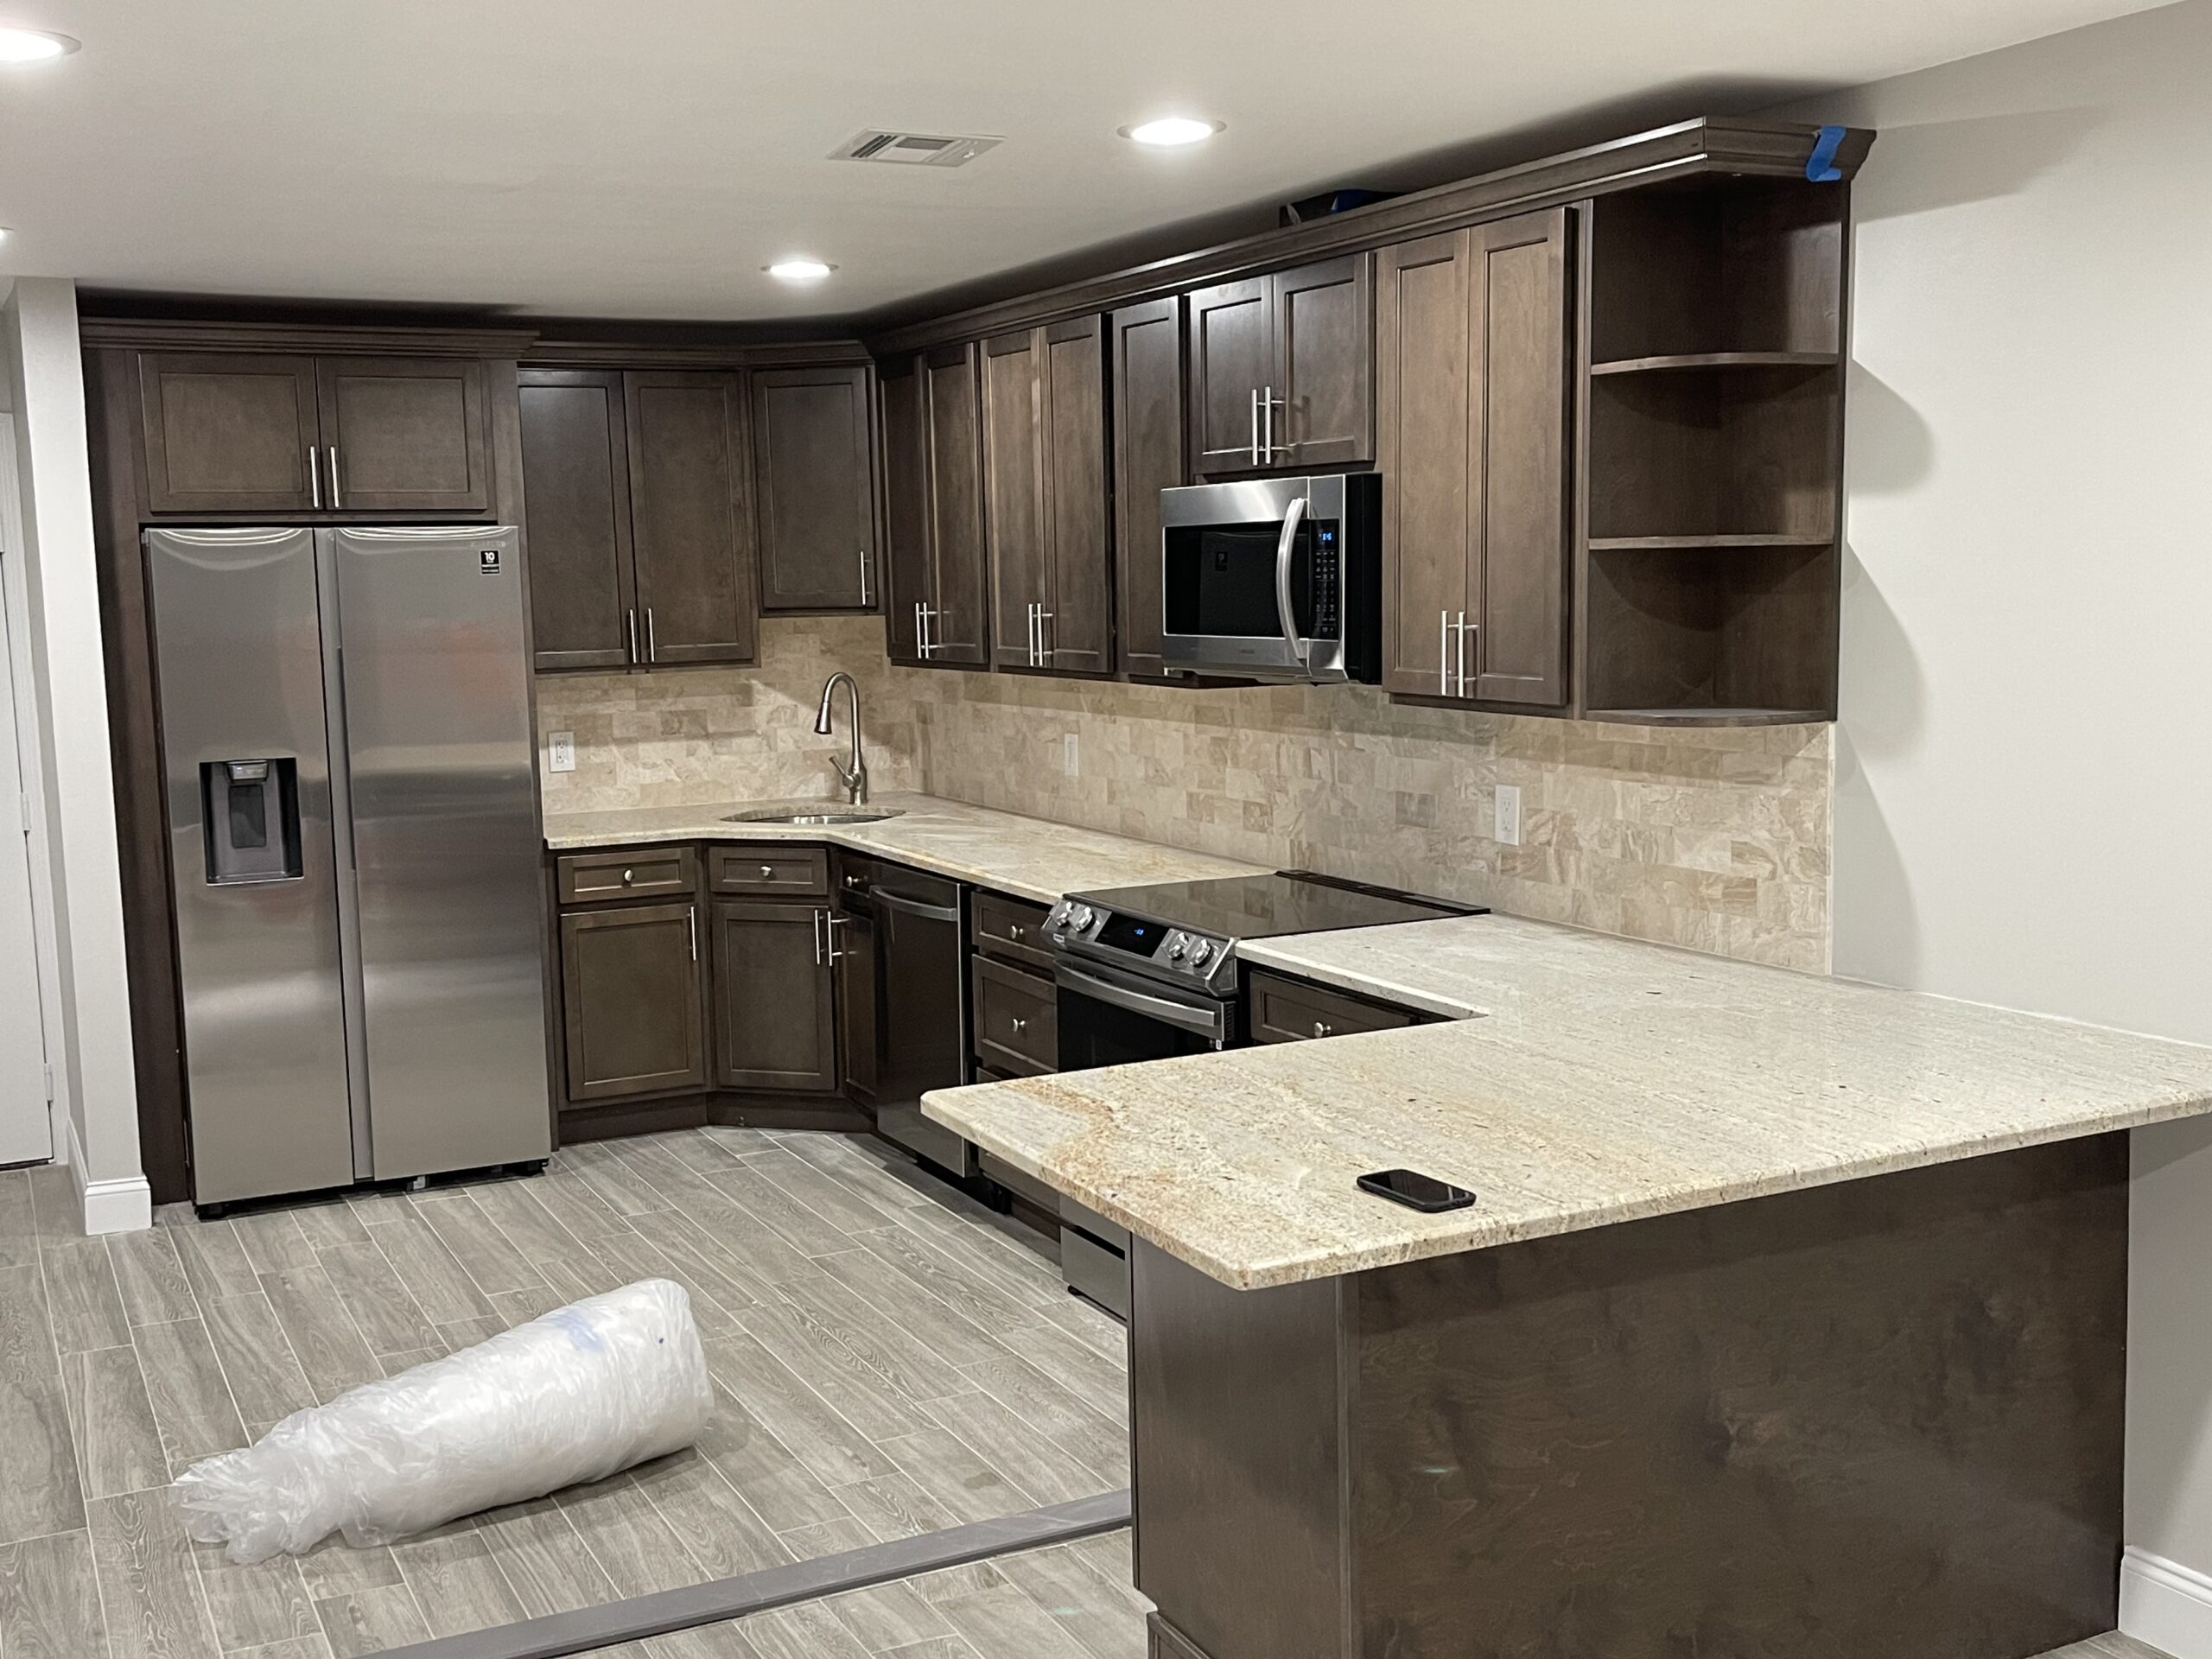 Kitchen Cabinets & Countertop Project, North Bergen, NJ